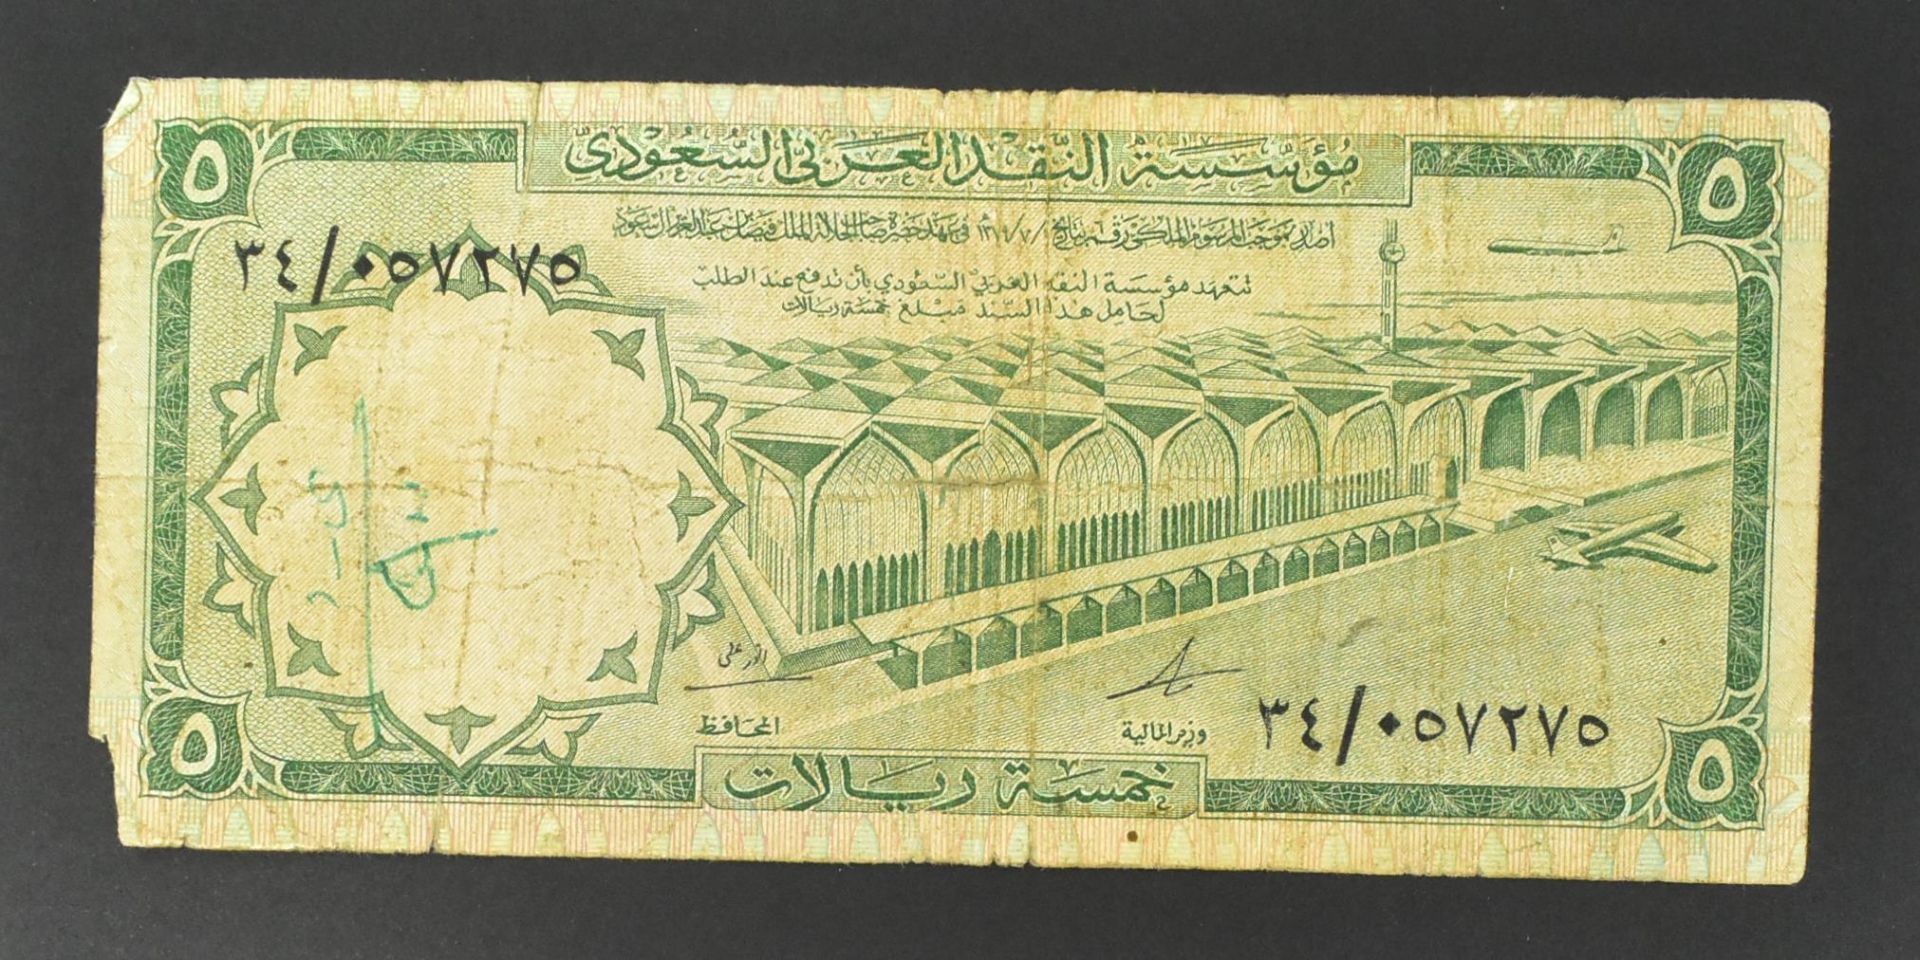 COLLECTION OF INTERNATIONAL UNCIRCULATED BANK NOTES - OMAN - Image 27 of 51